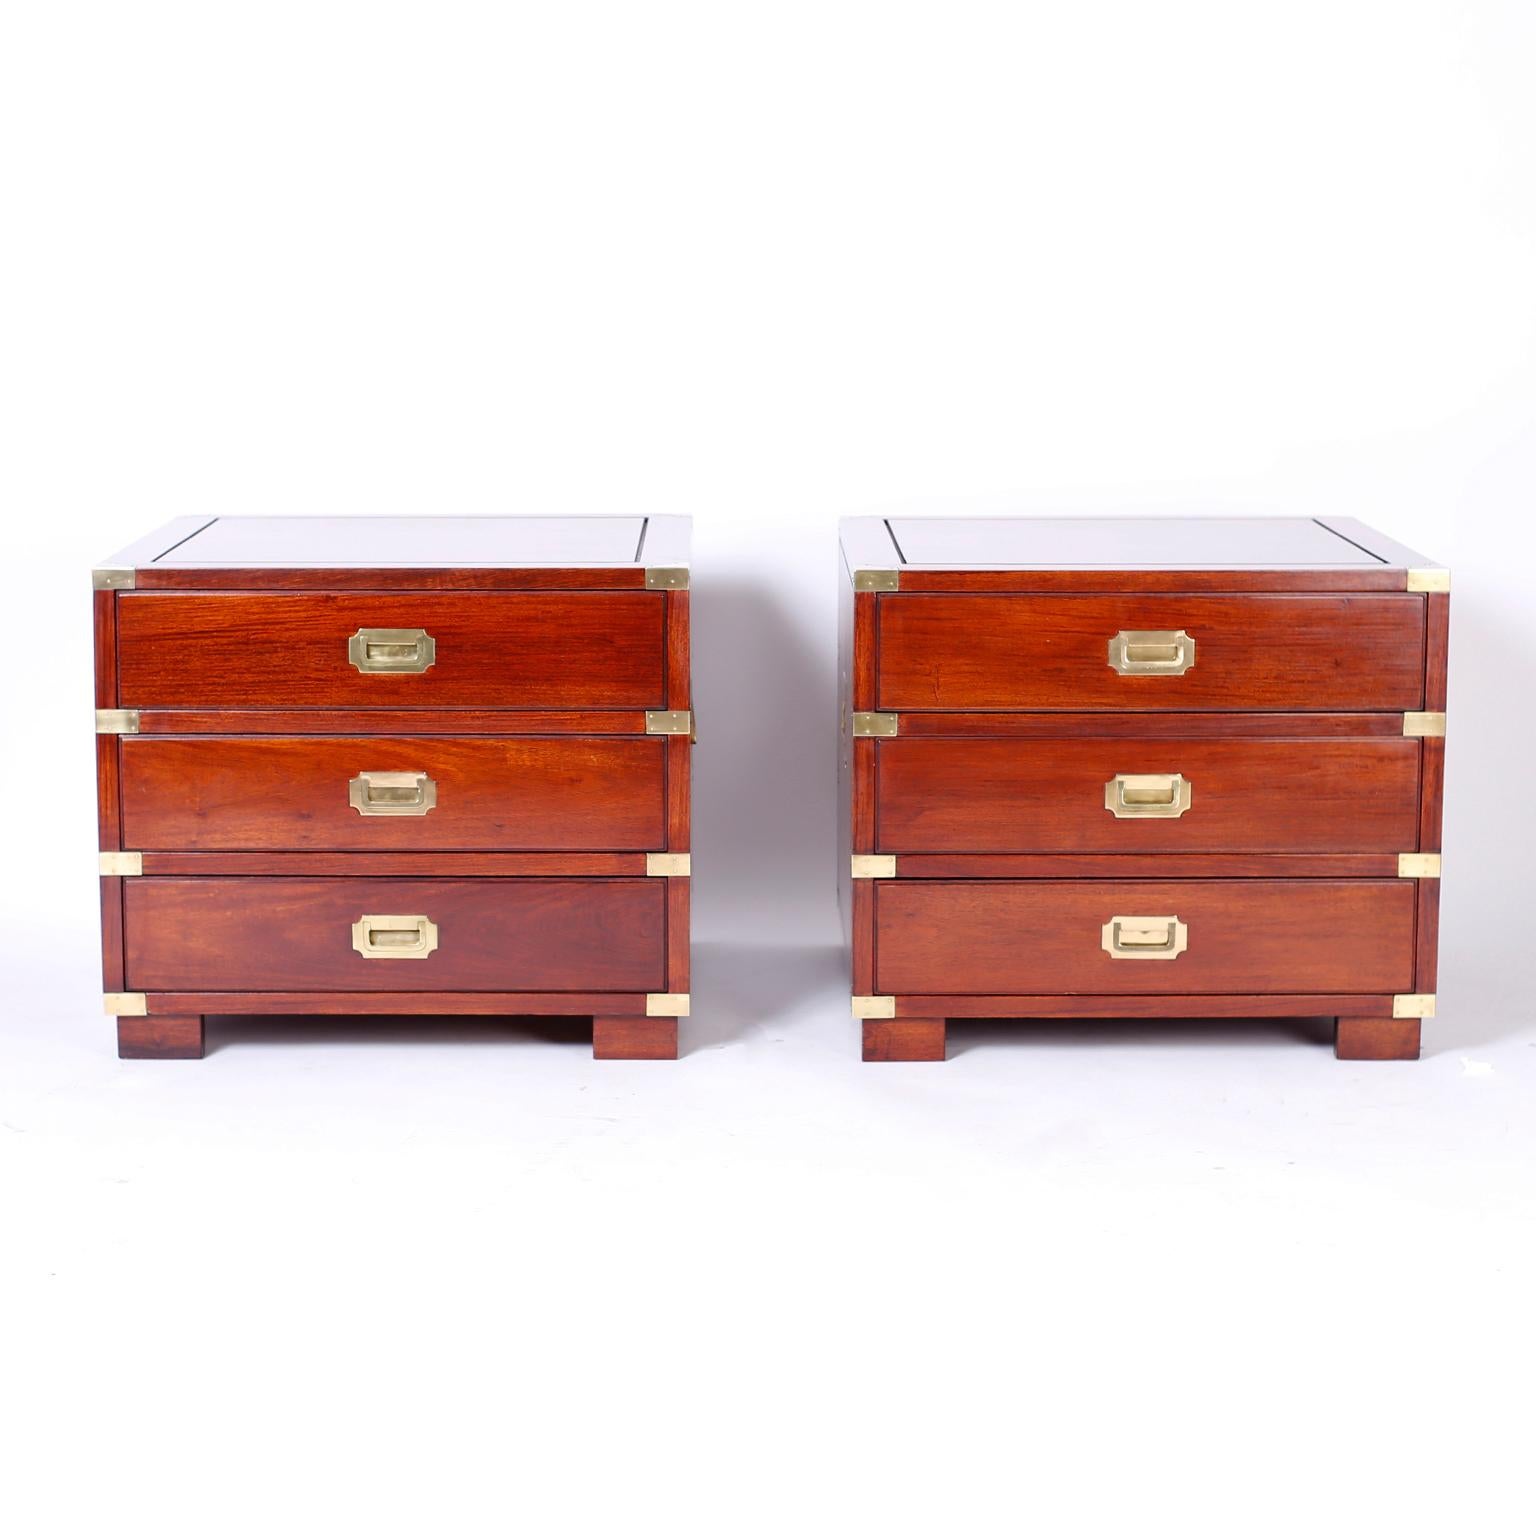 
Campaign Style Nightstands or Chests. Impressive campaign style three drawer stands with a bold large scale, crafted in rosewood with paneled tops and sides, campaign brass hardware, and block feet. Perfect marriage of tradition and modern.
